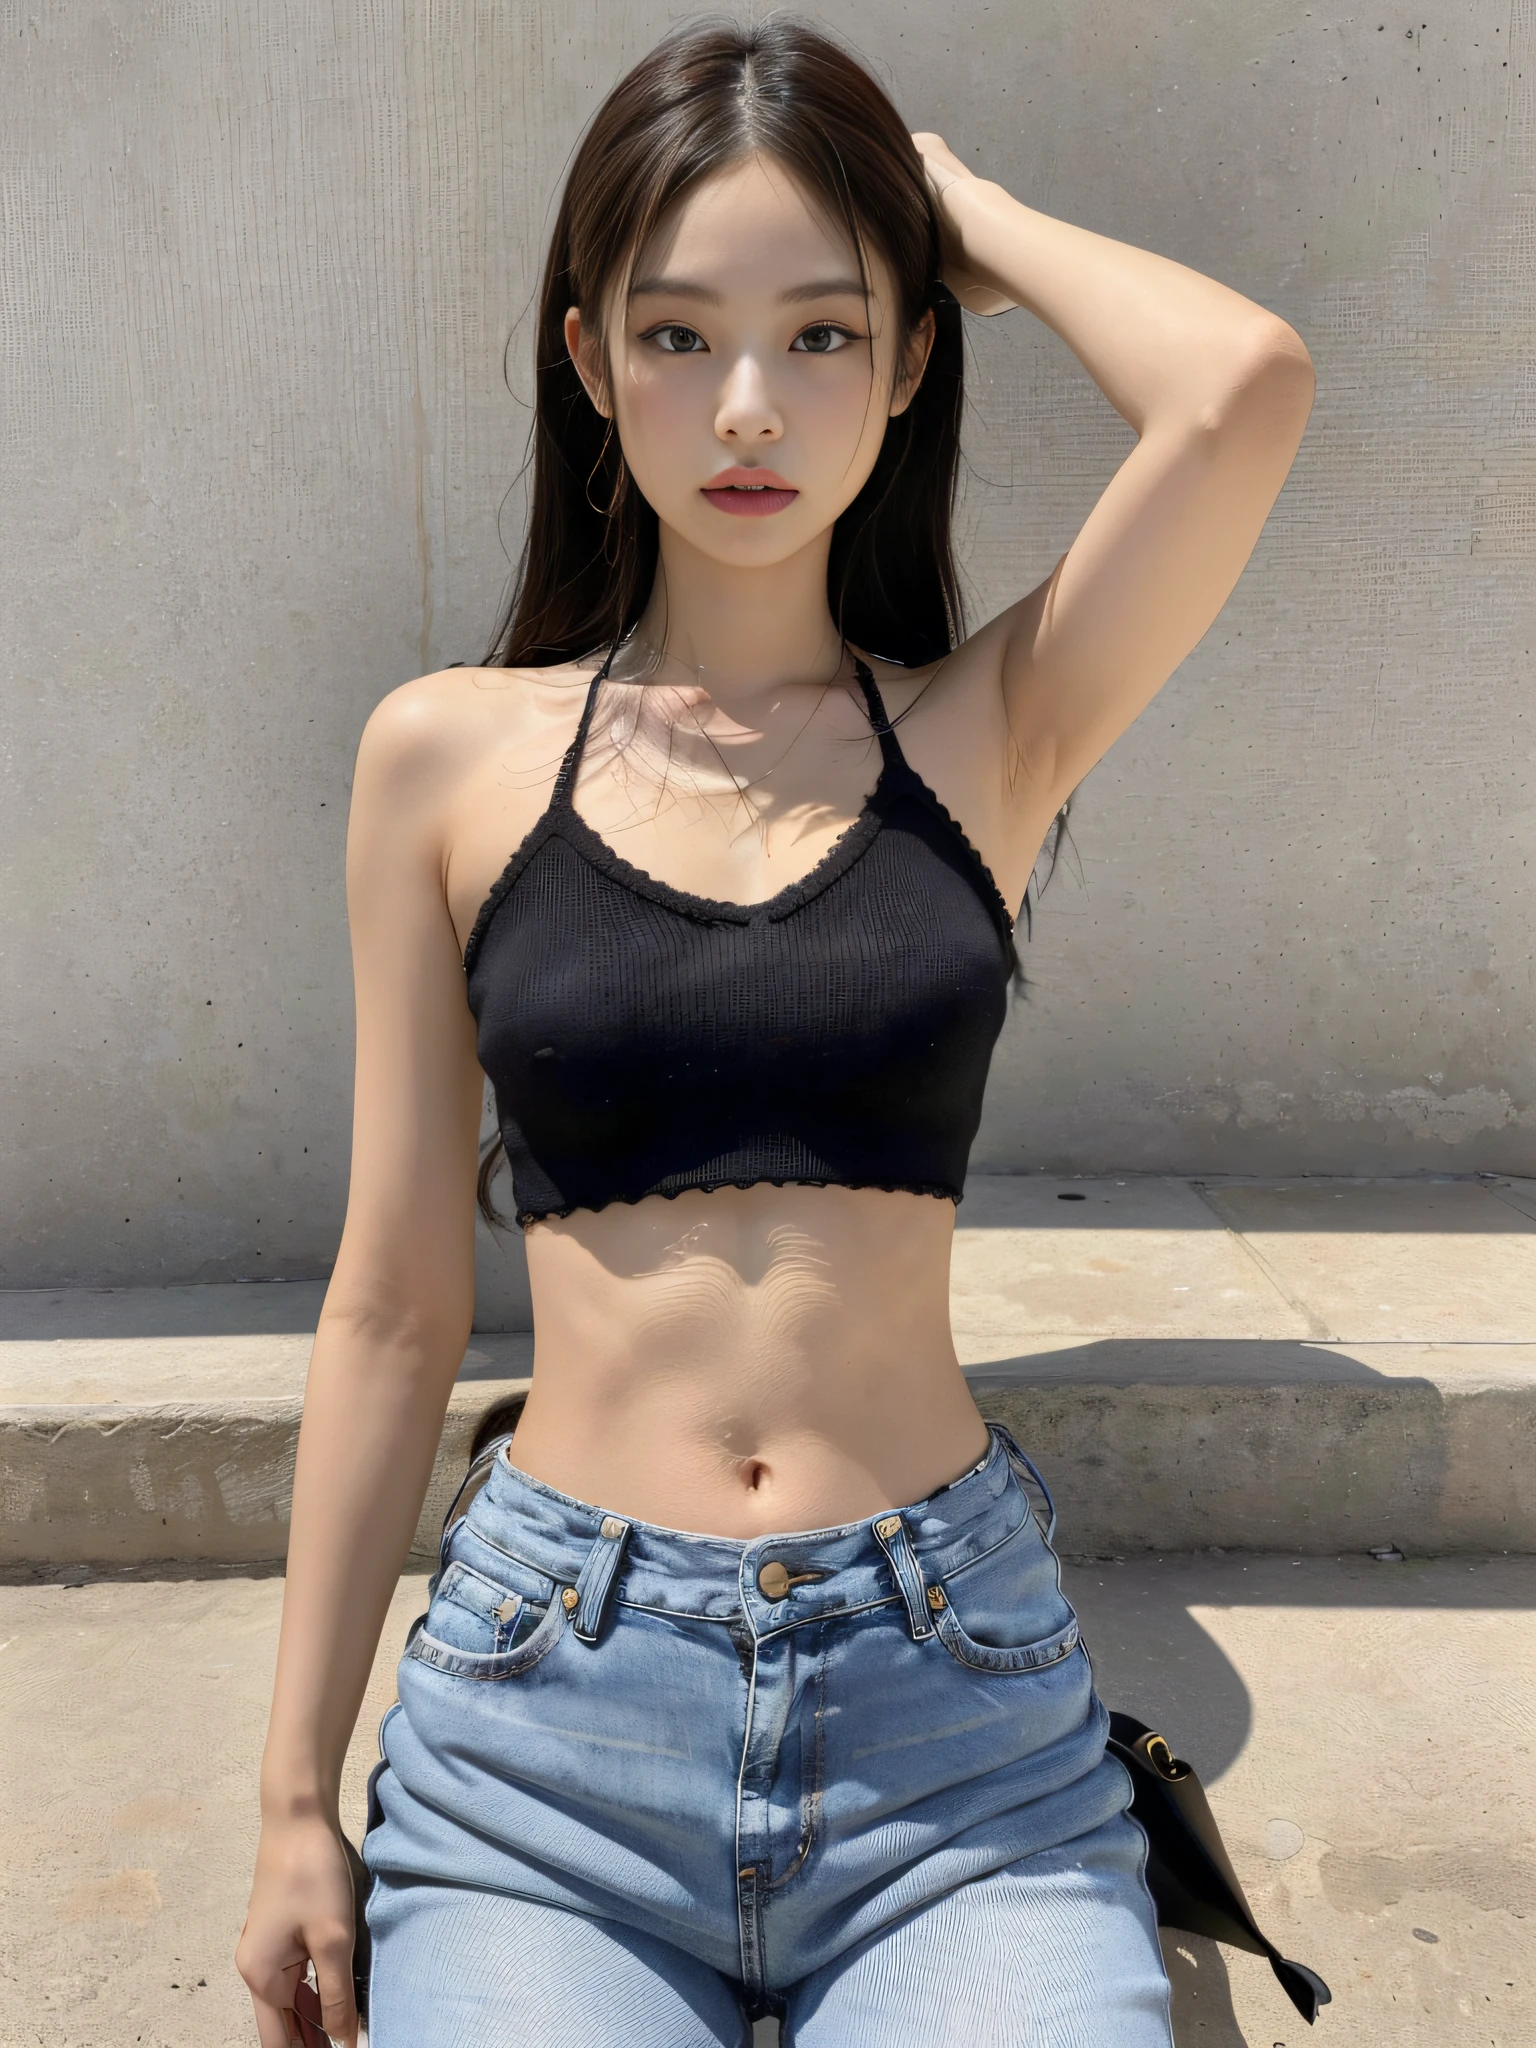 (1girl:1.3), Solo, __body-parts__, Kim Ji-ni Jennie Face, Kim Ji-ni Jennie Face, Kim Ji-ni Jennie Face, Knitted Black and Gray Deconstructed Top, Loose Fat Jeans (to the knee), Loose, Washed Old, Full Body Shot, 16K Resolution Image, Intricate Symmetrical Details. (Best Quality, 4K, Masterpiece: 1.3), Pretty Woman, 1 Girl, (Breasts, Skinny, Slim Figure: 1.2), Abs: 1.1, Ultra-detailed face, Detailed lips, Detailed eyes,